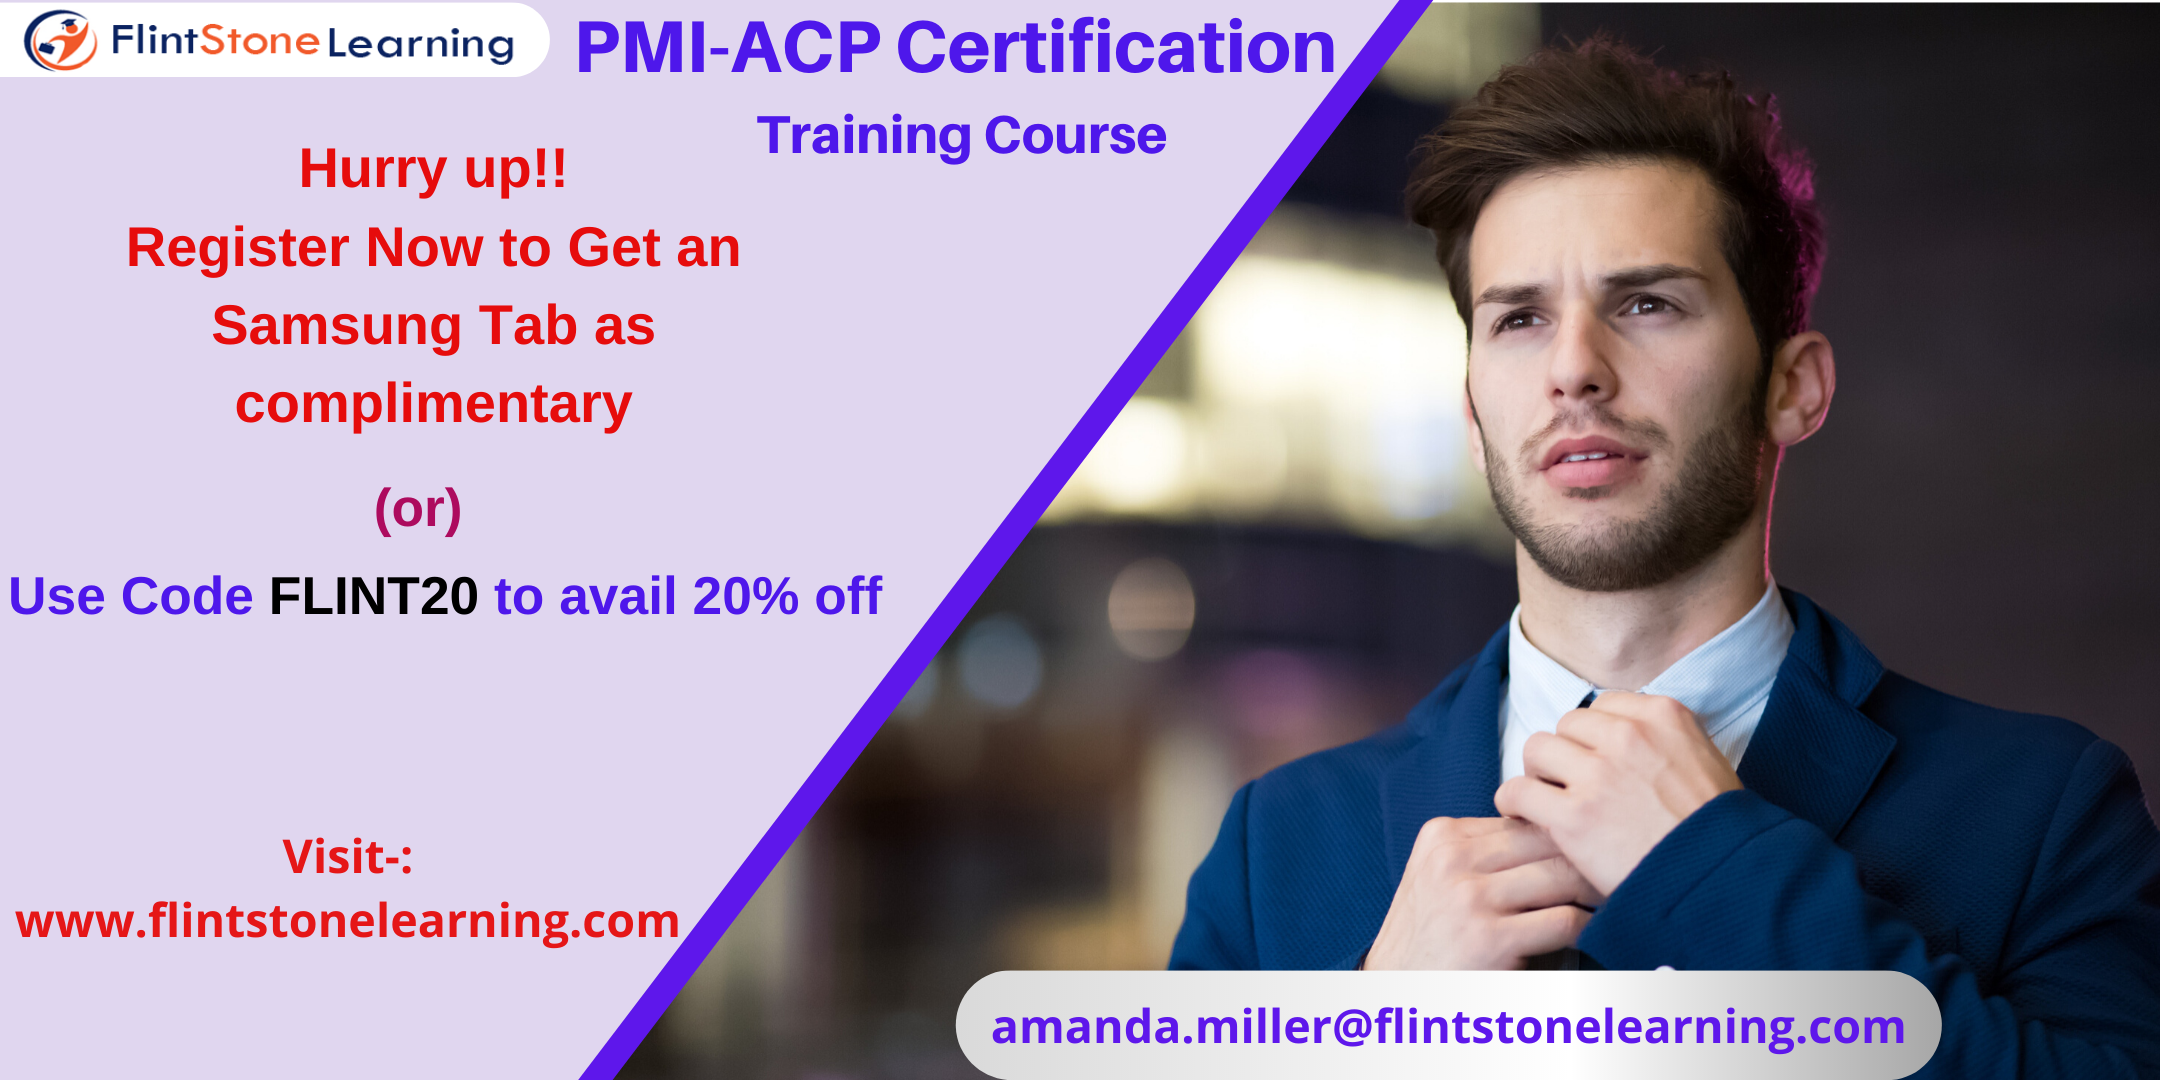 PMI-ACP Certification Training Course in Bothell, CA